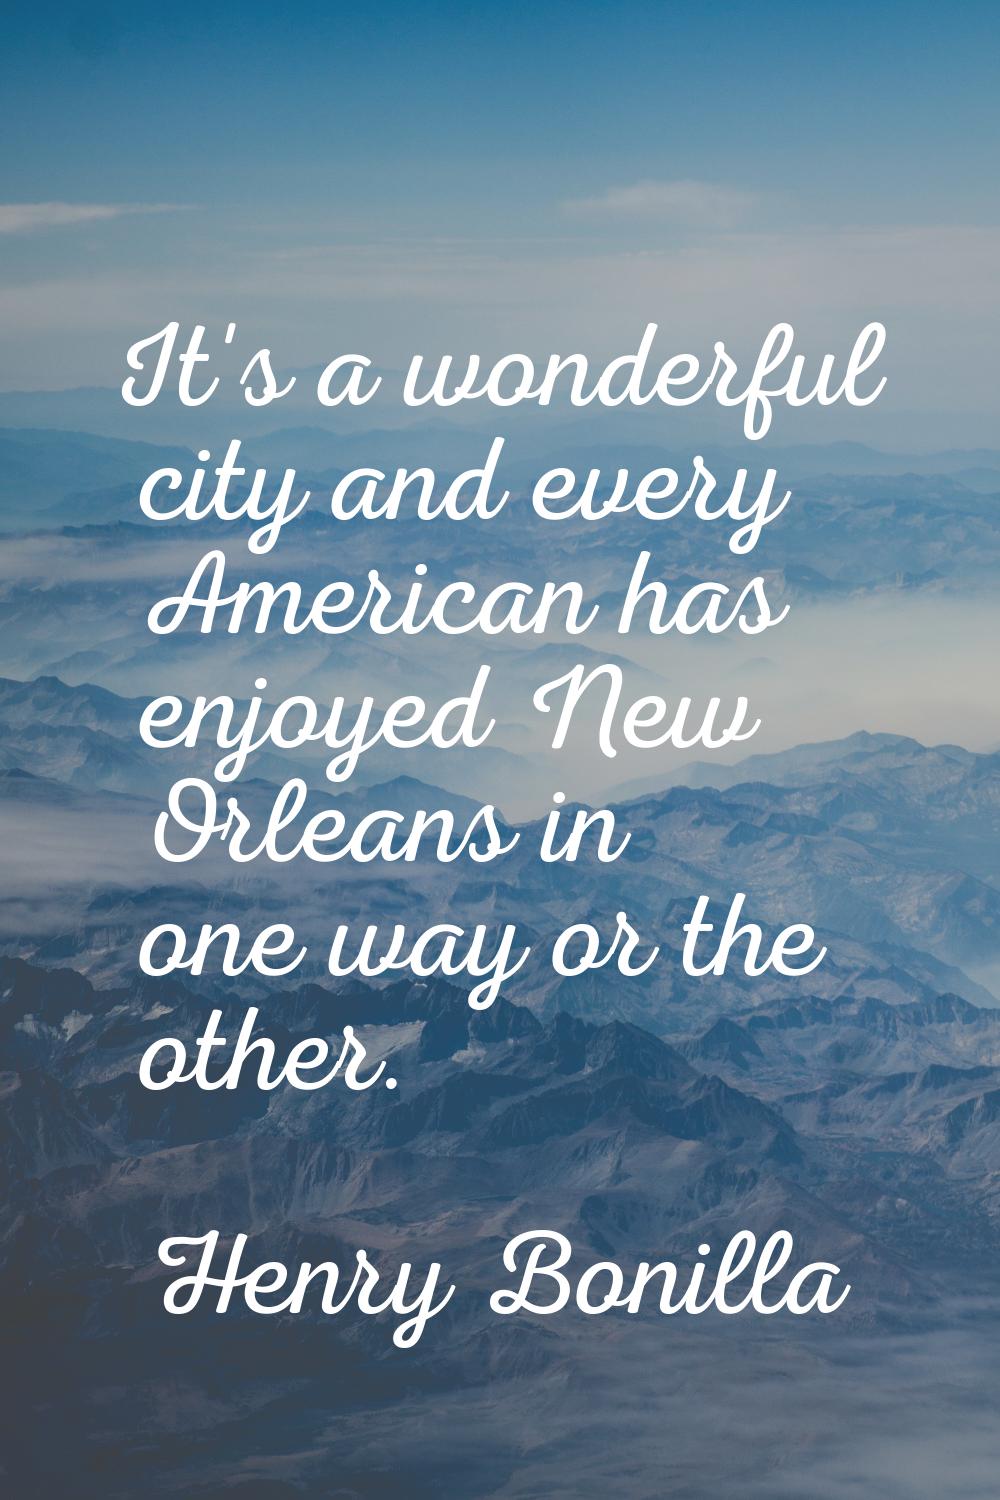 It's a wonderful city and every American has enjoyed New Orleans in one way or the other.